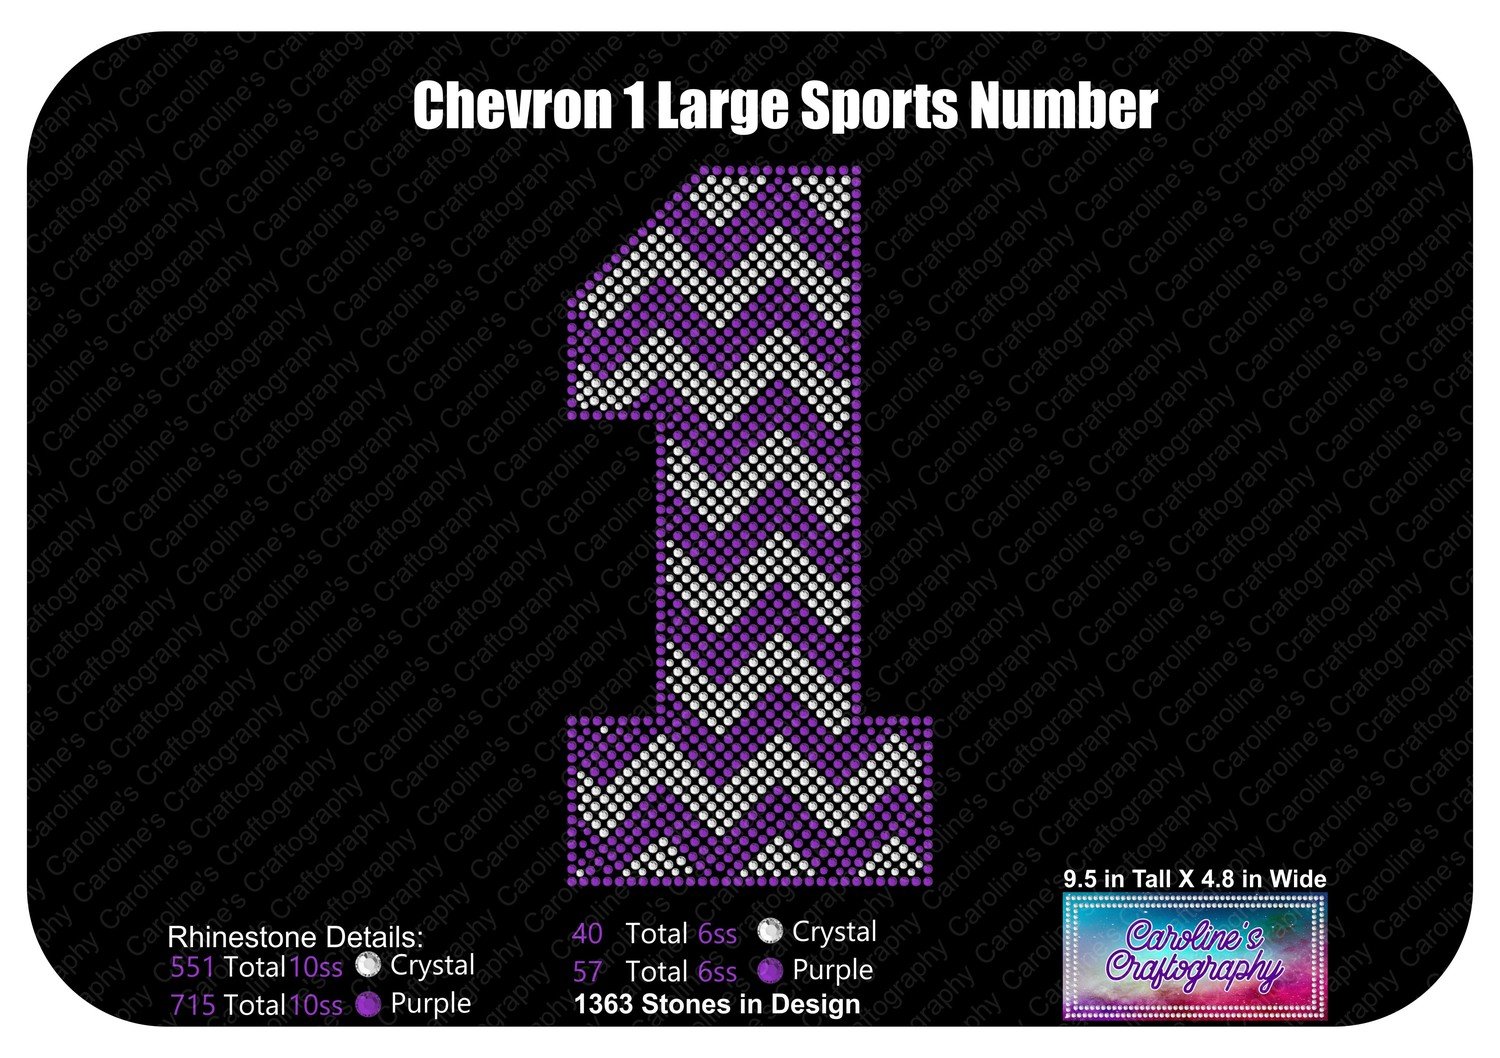 1 Chevron Large Sports Number